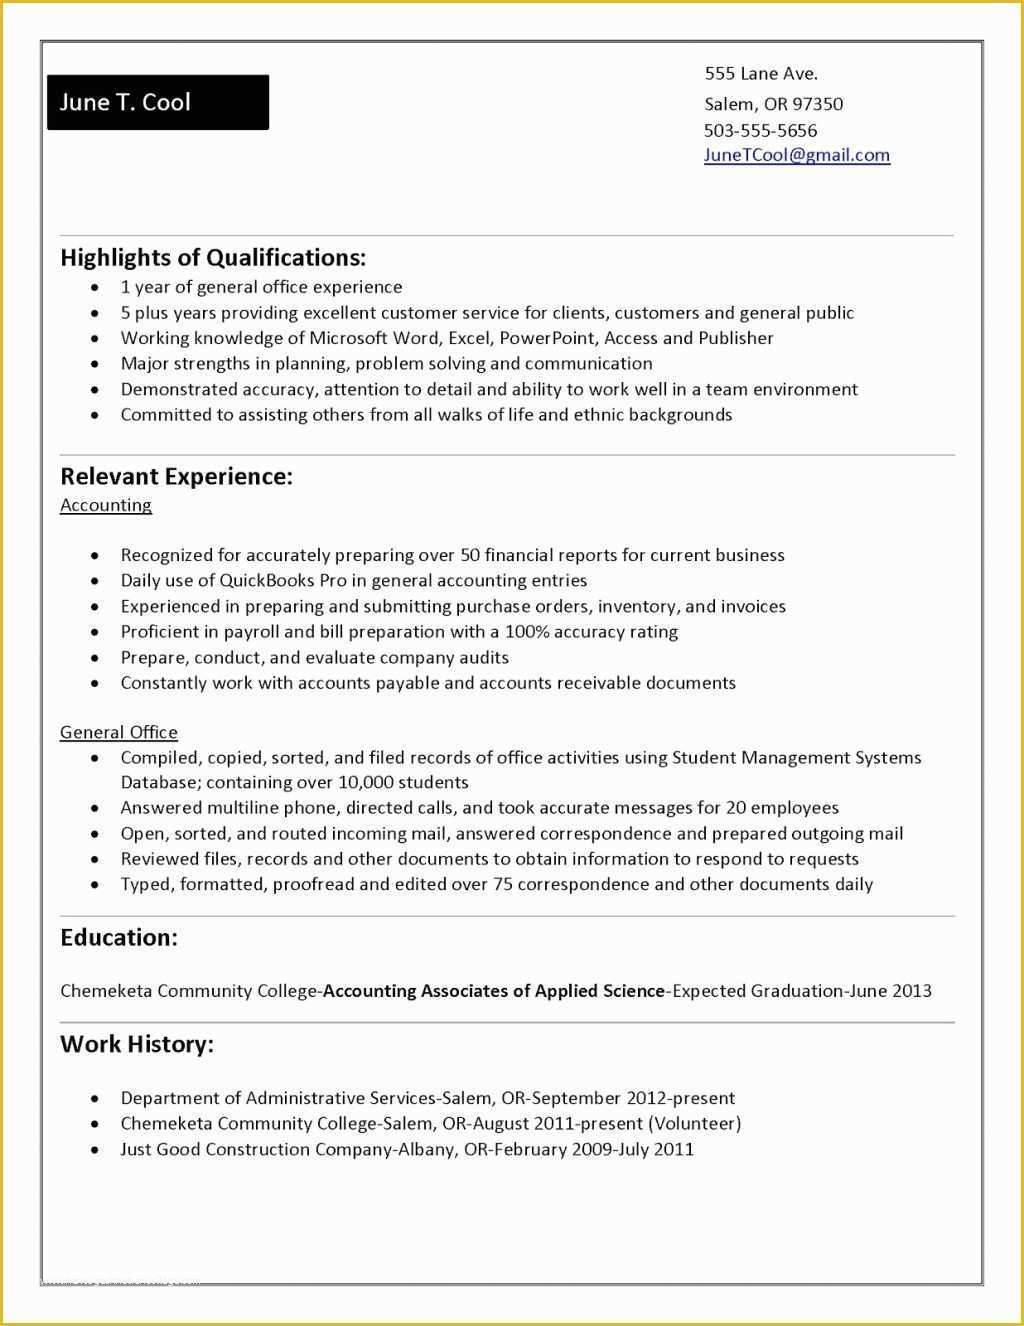 Free Resume Templates for No Work Experience Of No Work Experience Resume Template Tag Amazing Experience